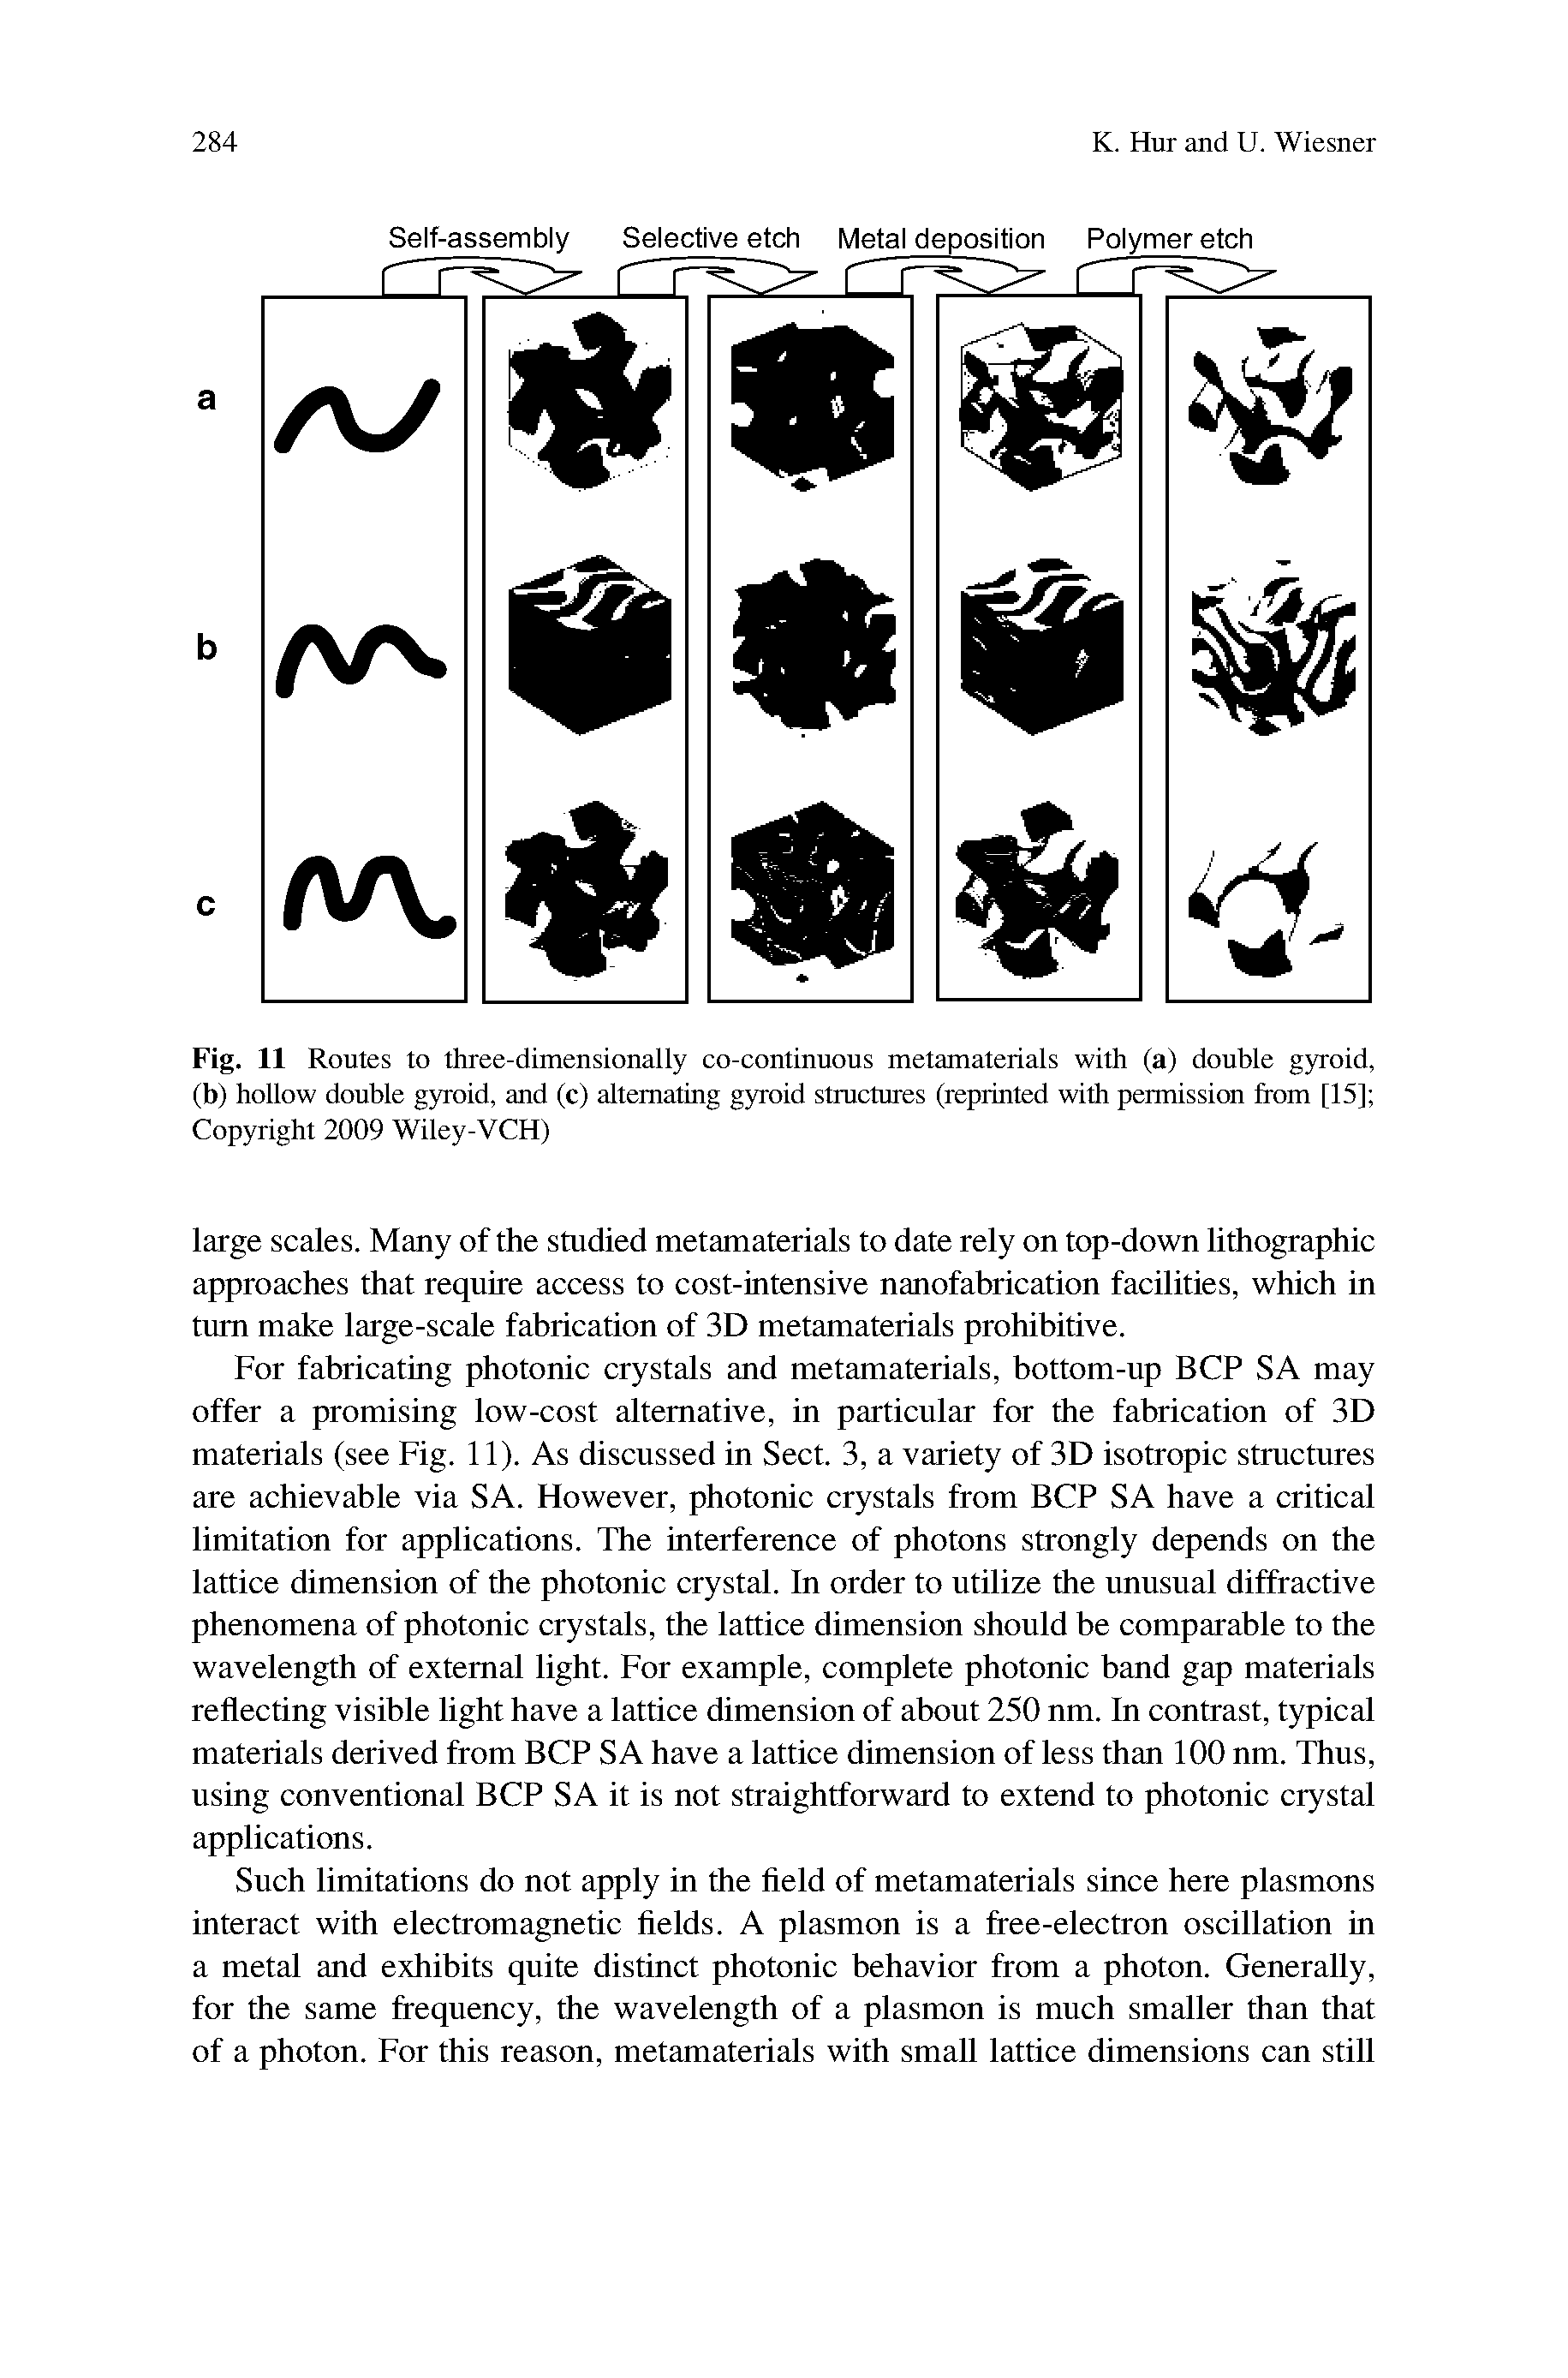 Fig. 11 Routes to three-dimensionally co-continuous metamaterials with (a) double gyroid, (b) hollow double gyroid, and (c) alternating gyroid structures (reprinted with permission from [15] Copyright 2009 Wiley-VCH)...